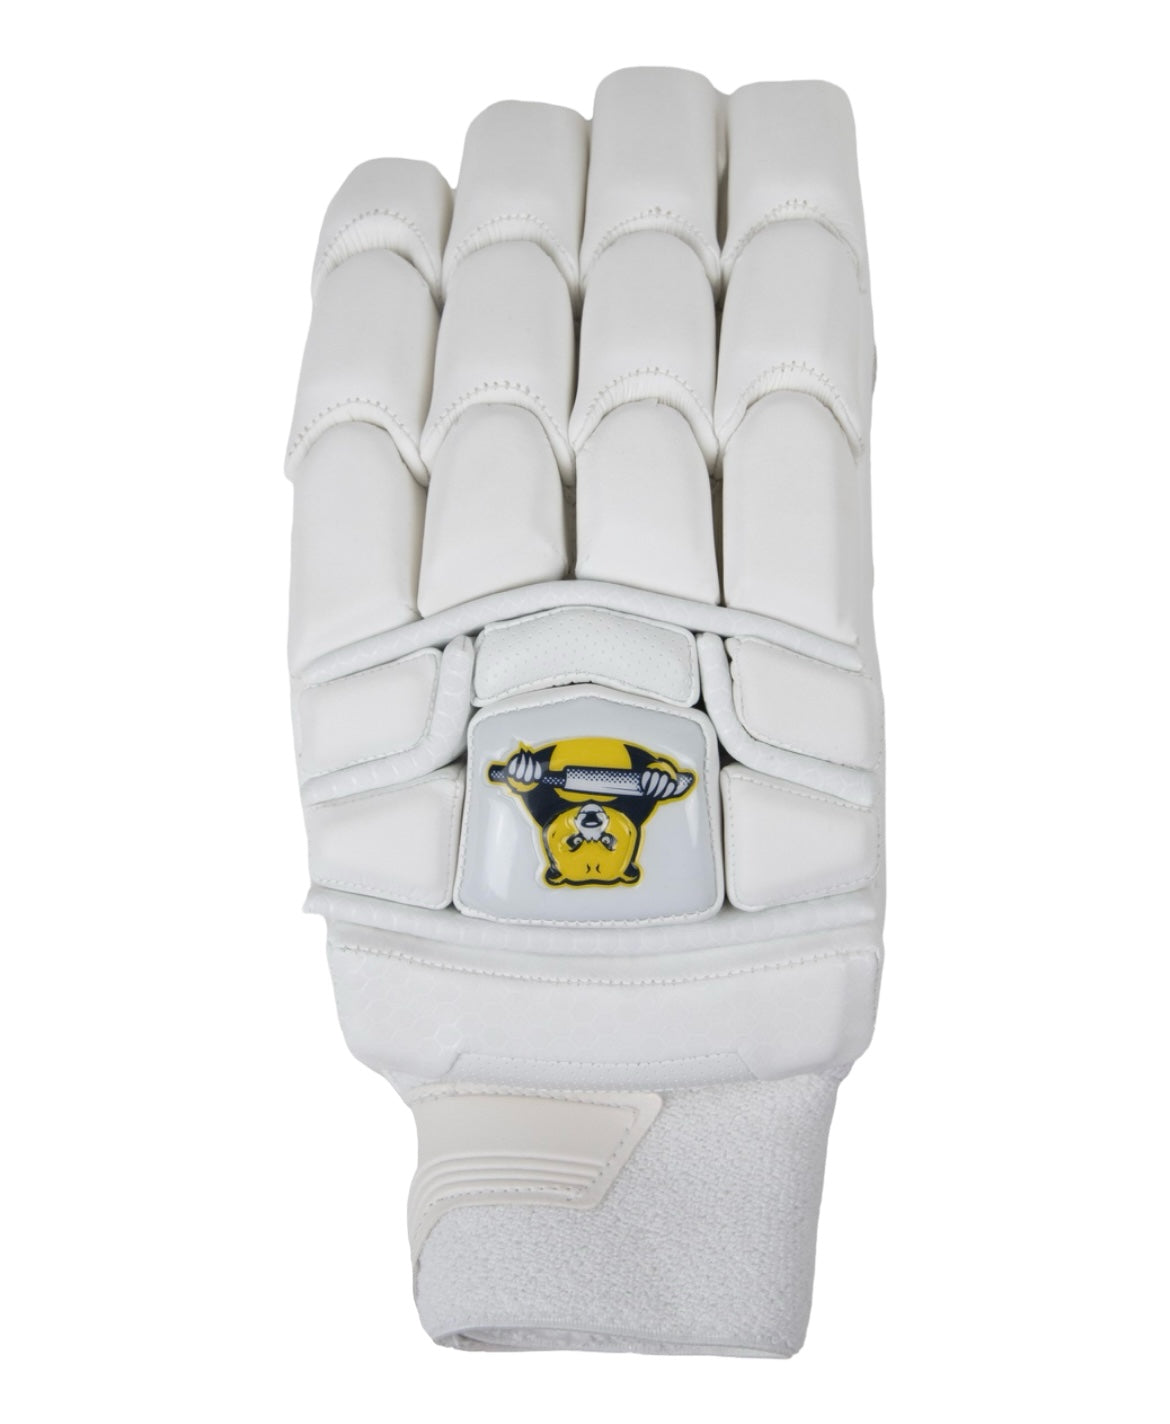 Bear Cricket Players Edition Junior Batting Gloves - The Cricket Store